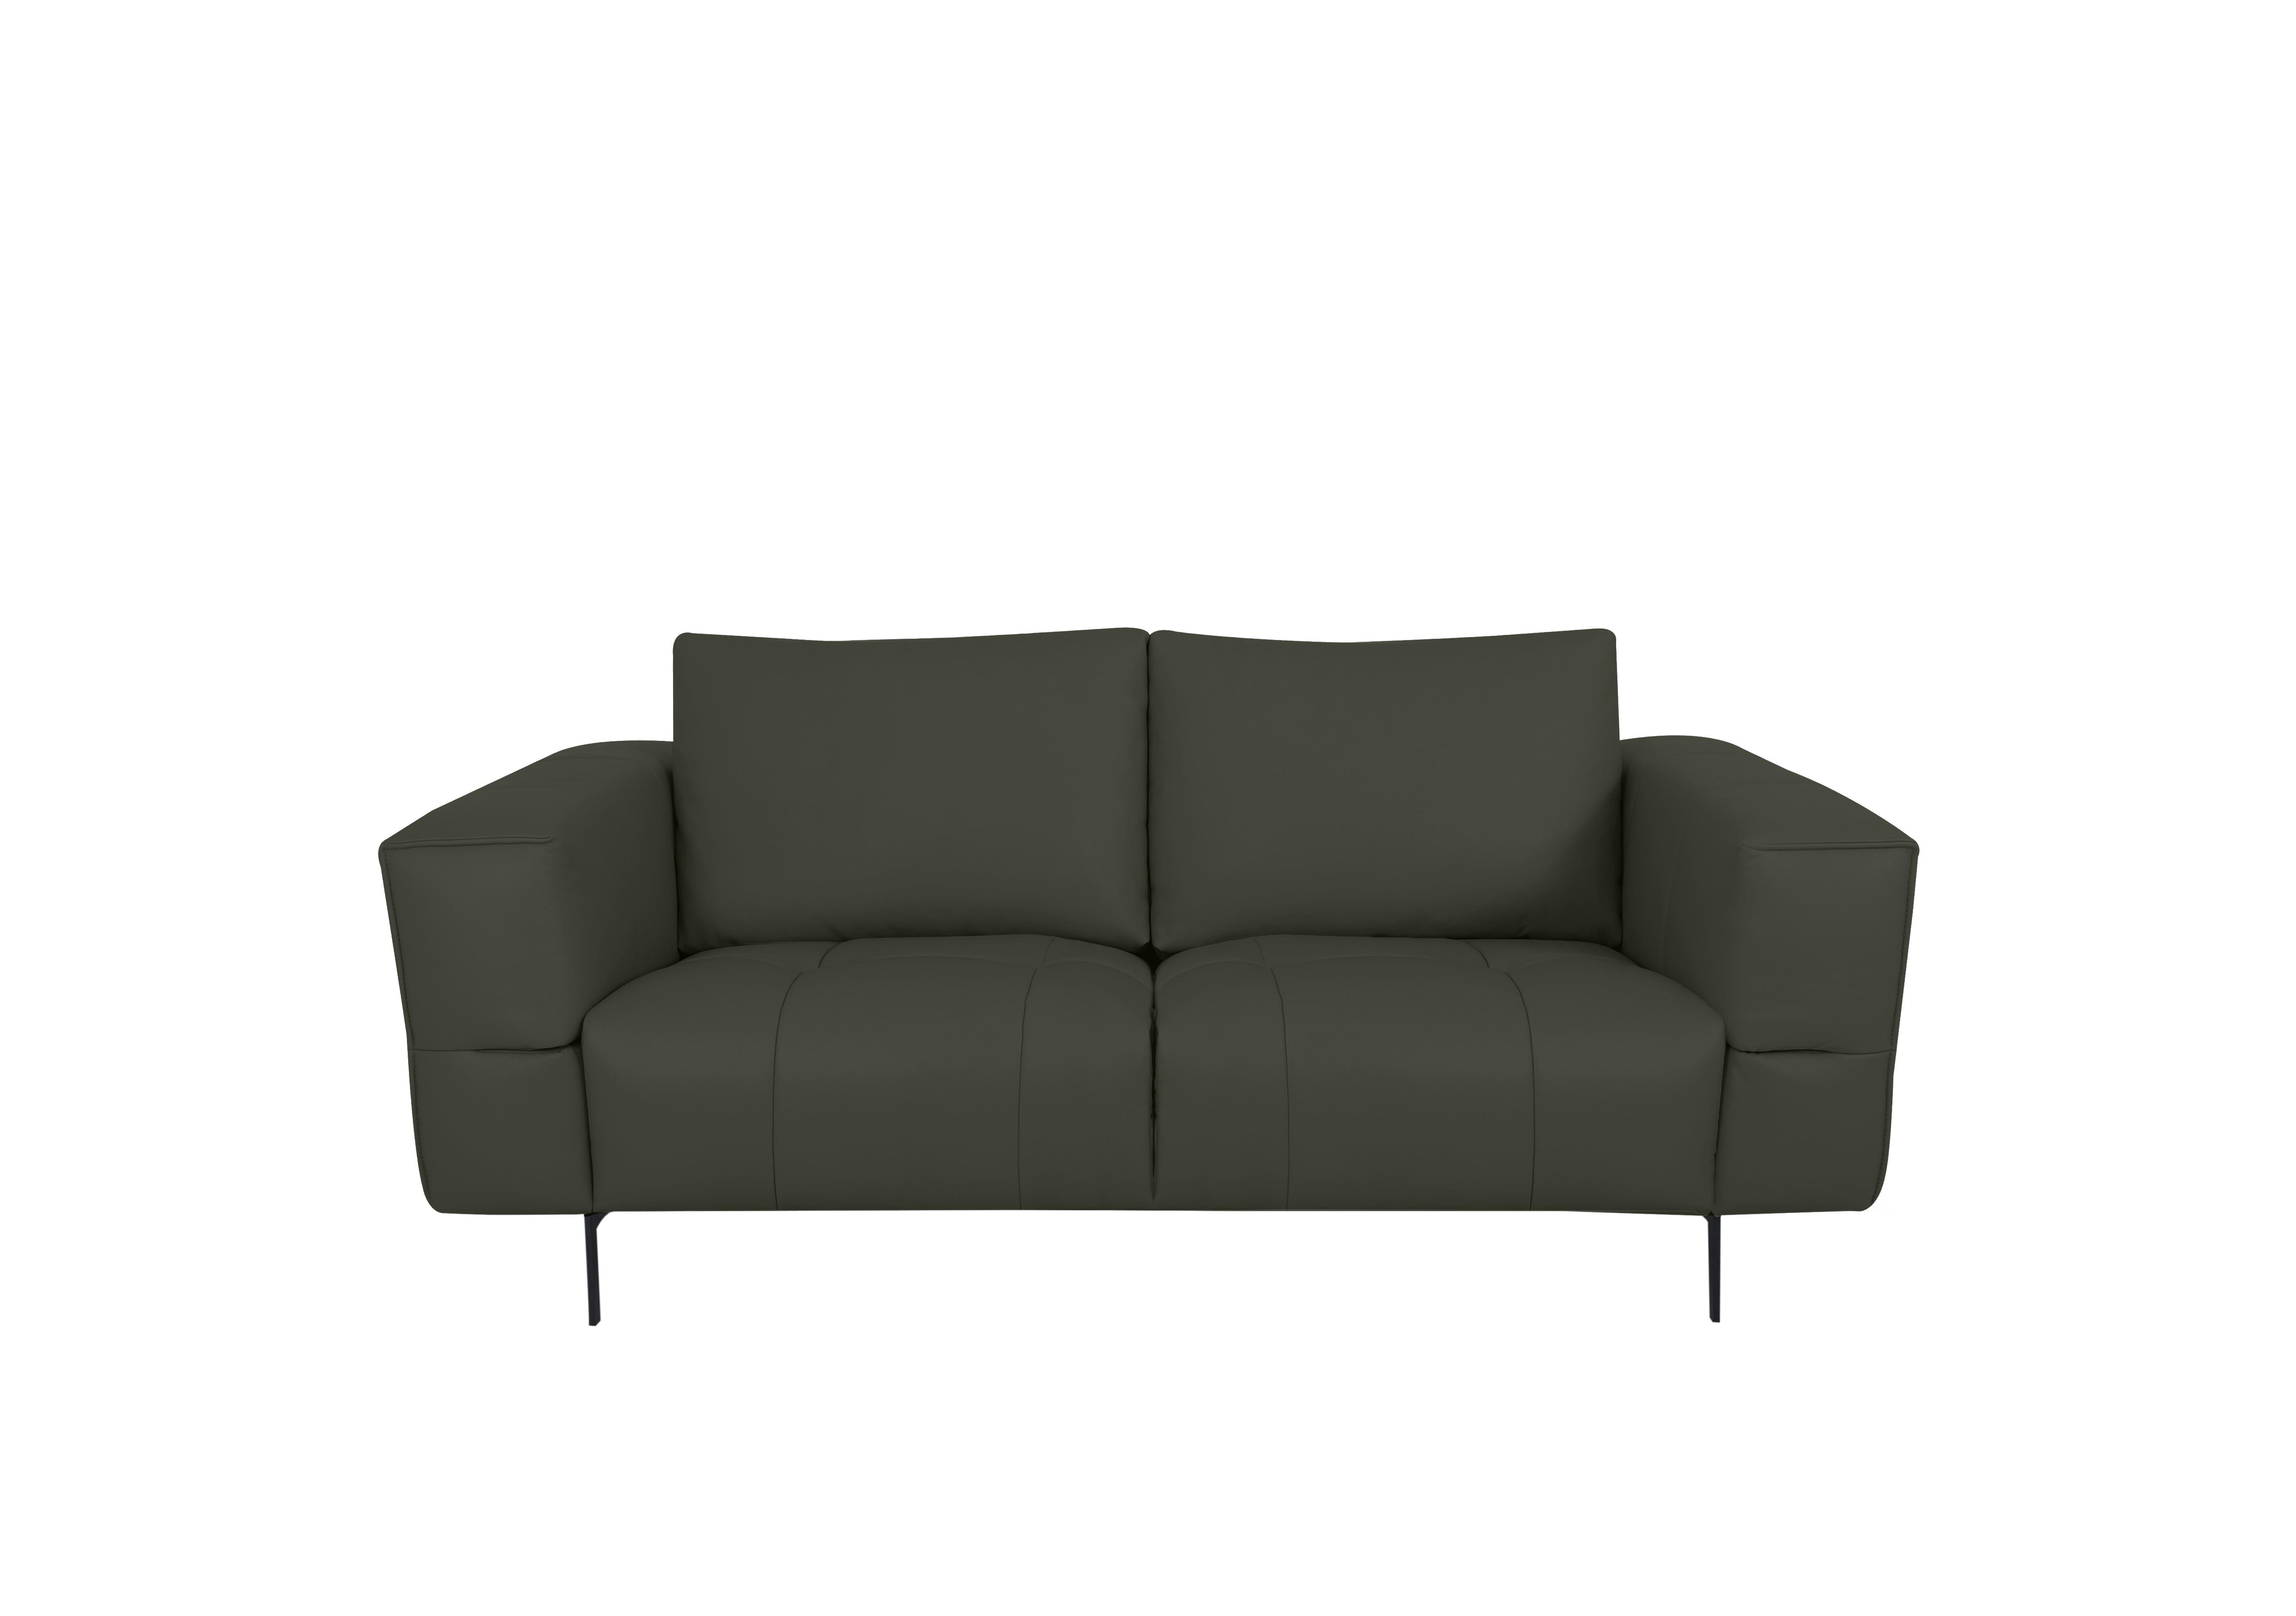 Lawson 2 Seater Leather Sofa in Np-548e Dark Olive on Furniture Village